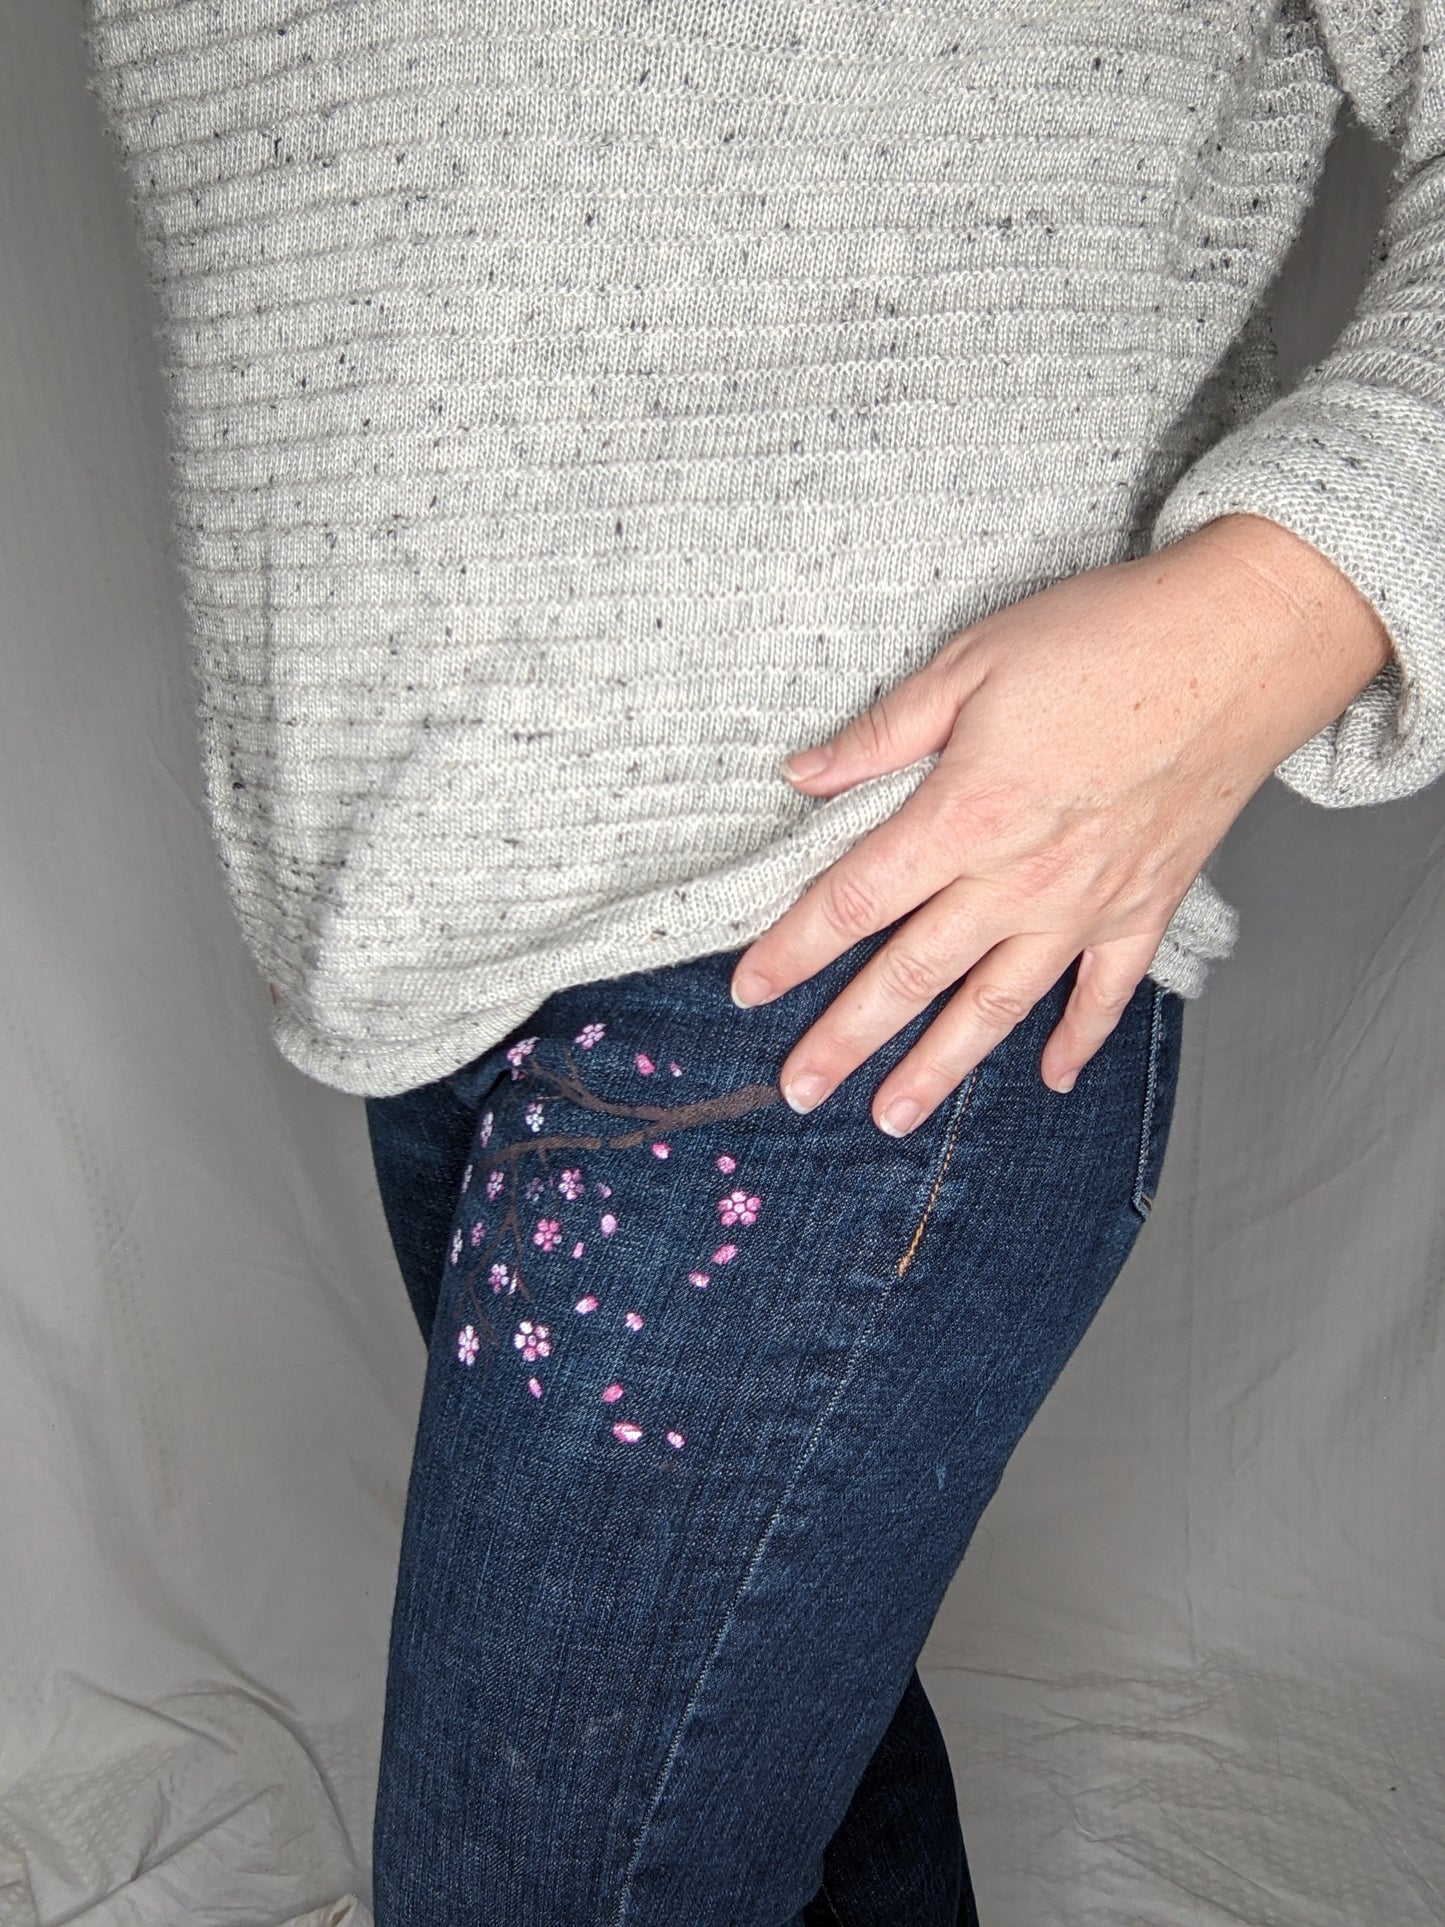 Upcycled Dark Wash Hand Painted Cherry Blossom Mid Rise Flare Jeans - Size 8 Short